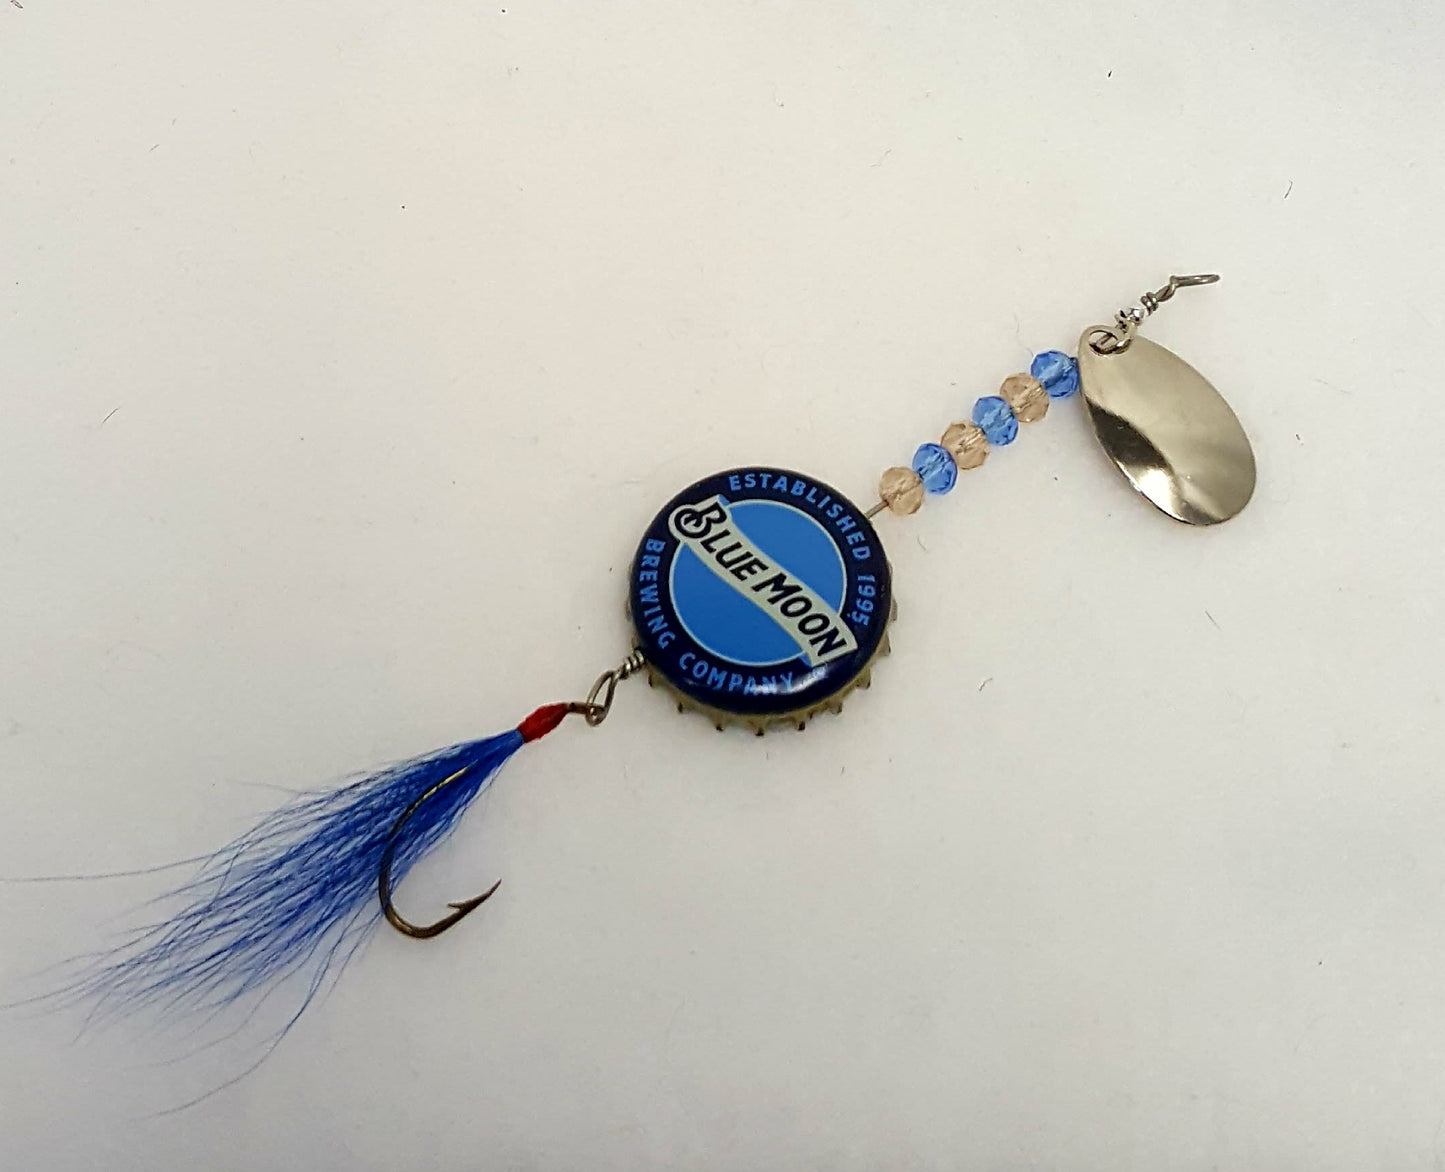 Lure has a blue bottle cap with clear & blue beads, and blue fly.